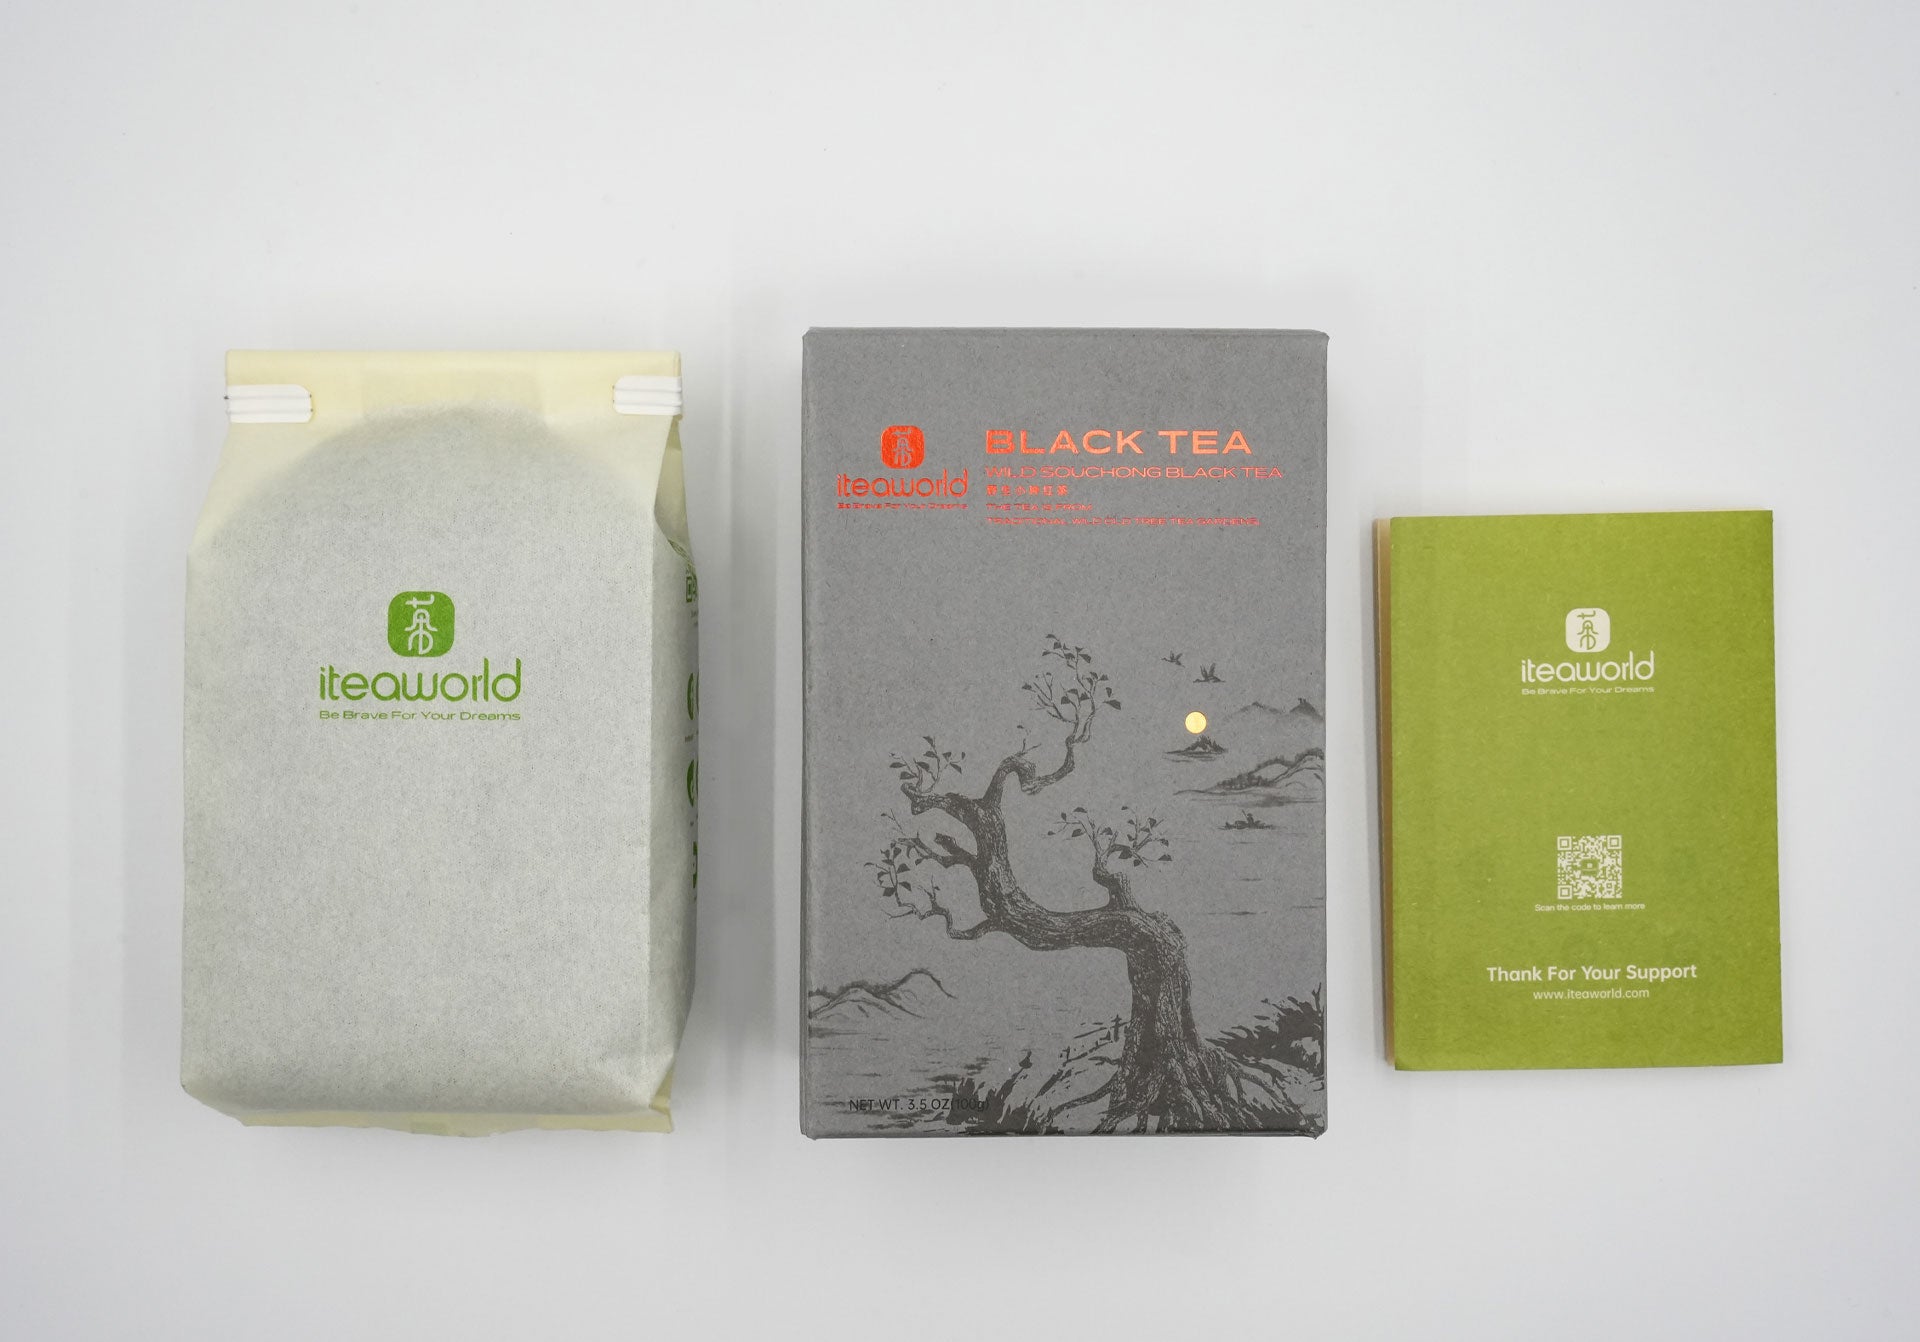 Product-Packaging-Adhering-to-Sustainability